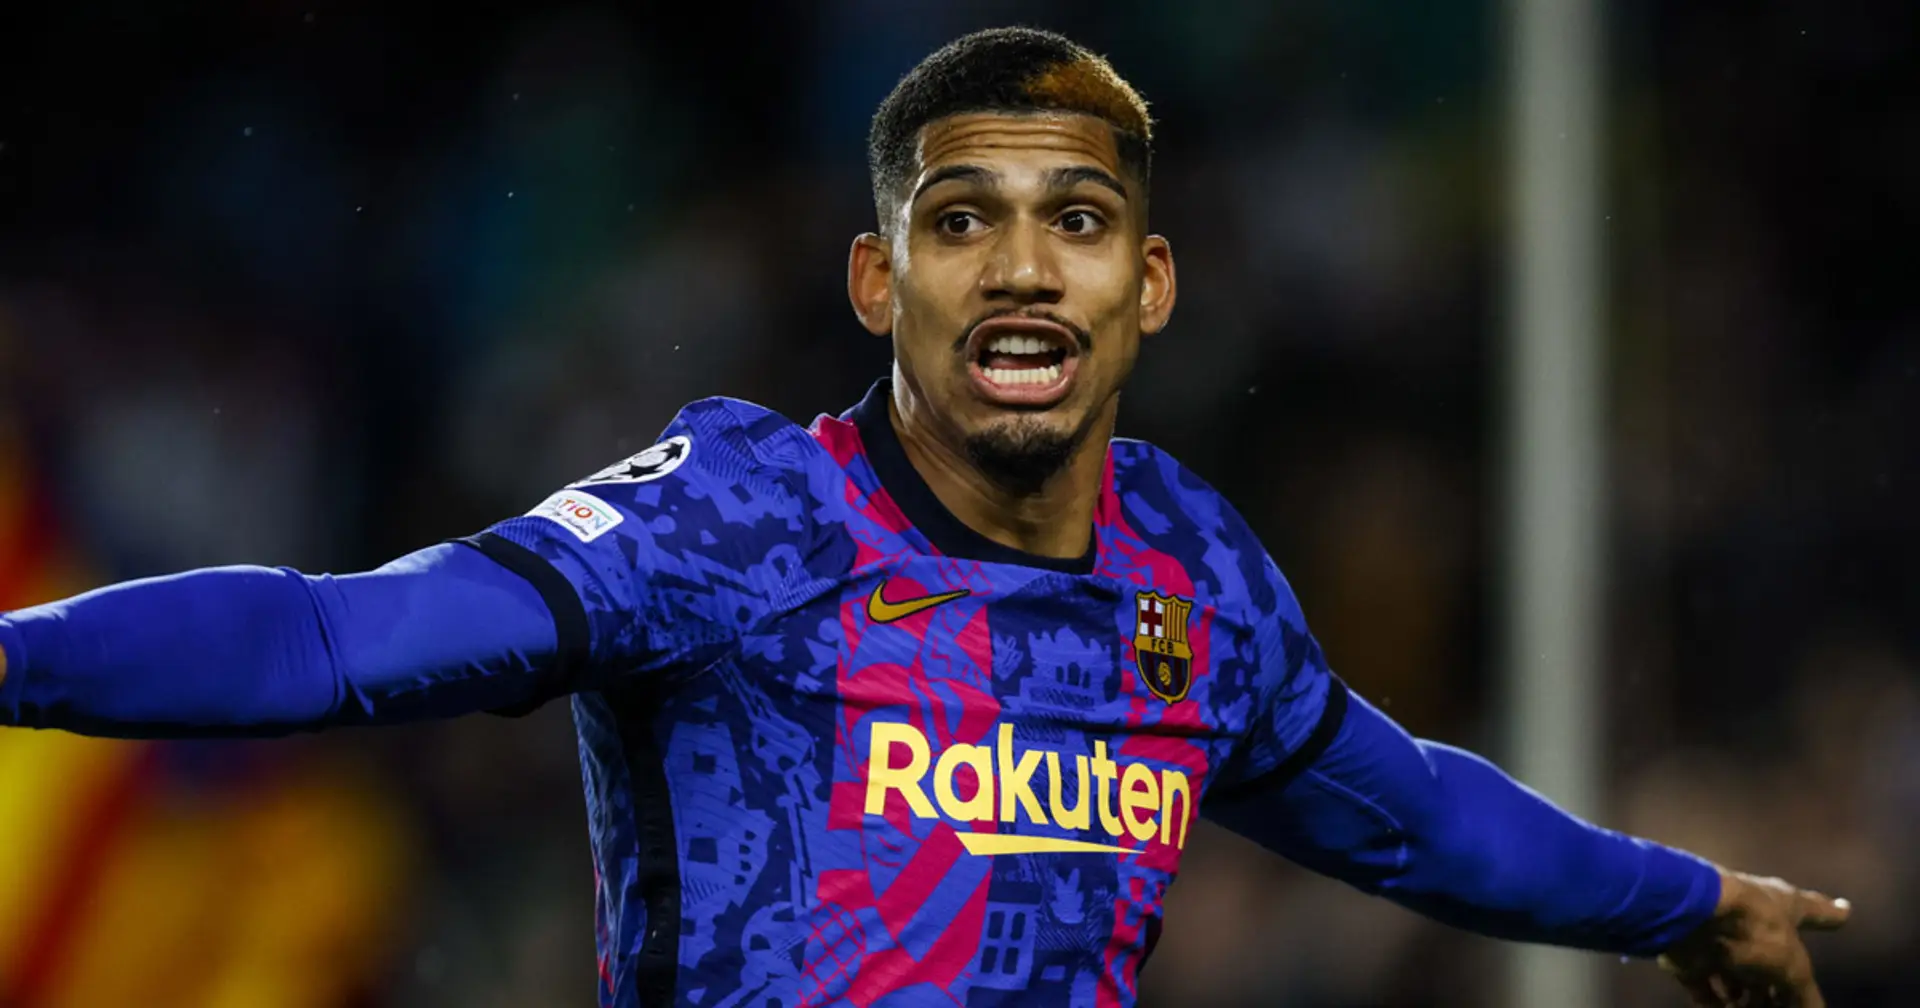 Chelsea and Liverpool ready to bid for Araujo if Barca's offer doesn't convince him (reliability: 4 stars)